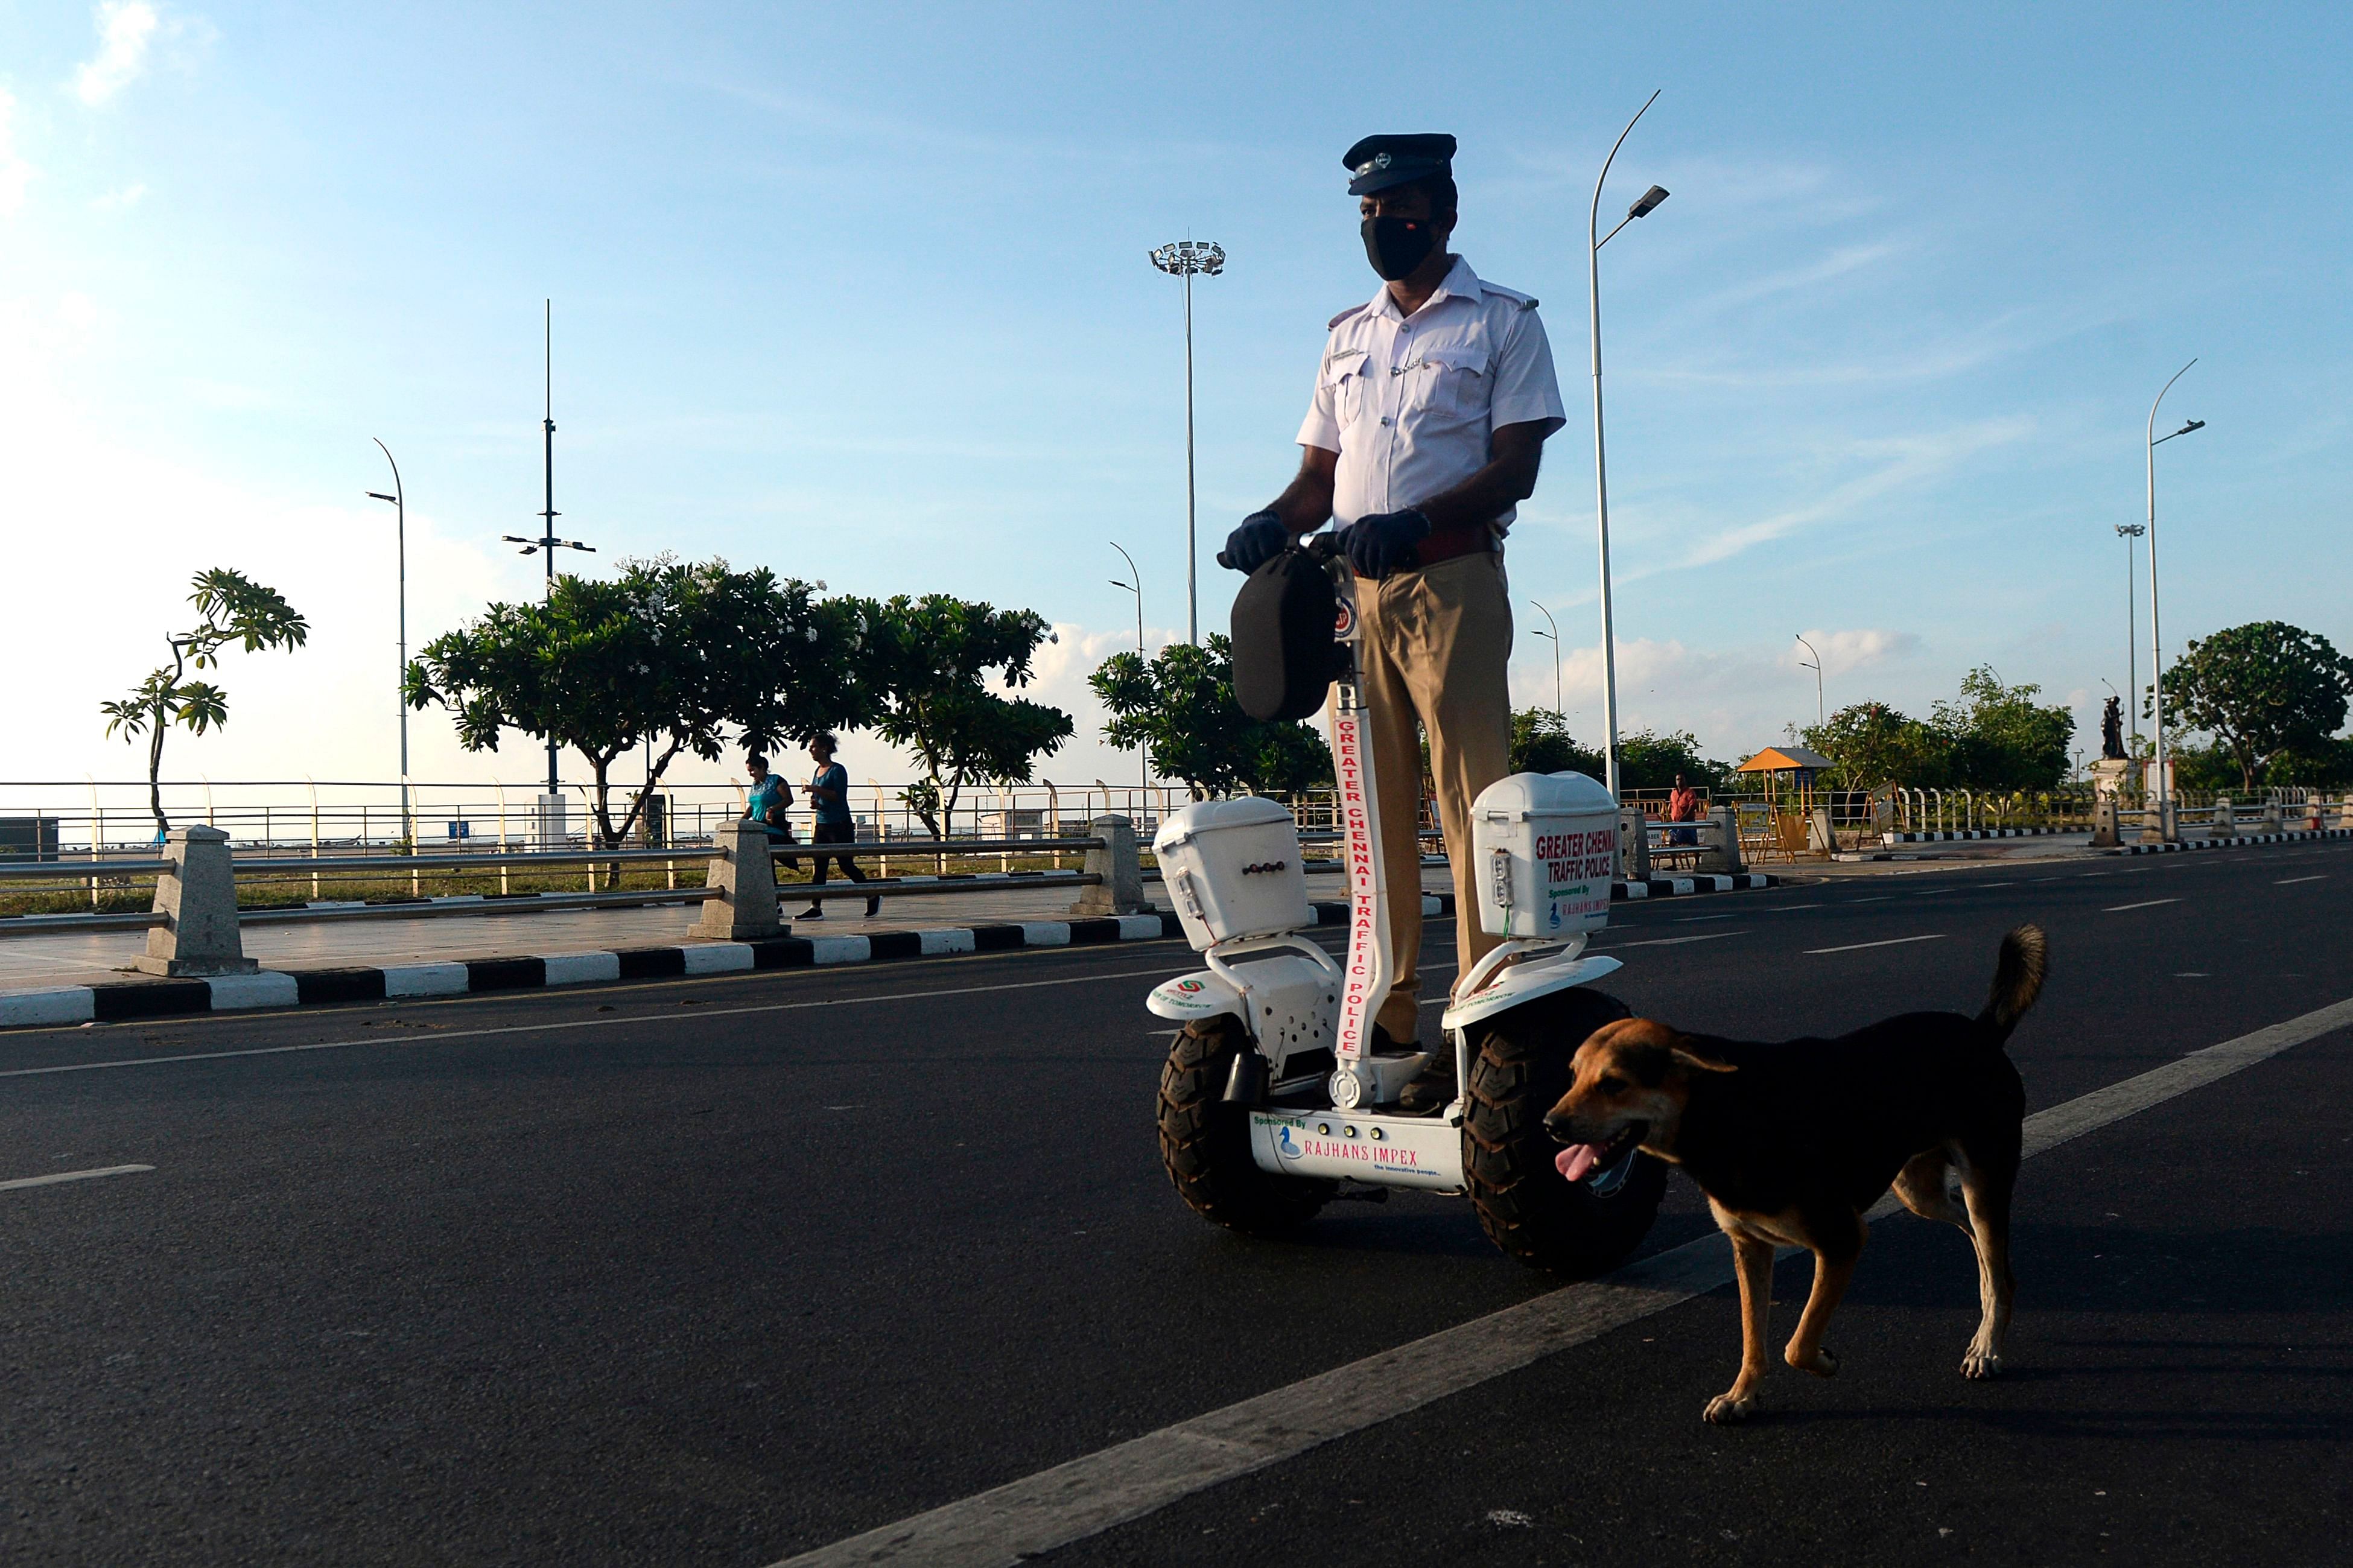 The cases have reduced since the second week of July because of these measures and a strict lockdown the Tamil Nadu government implemented in the city of Chennai from June 19 to July 5. Representative image/Credit: AFP Photo